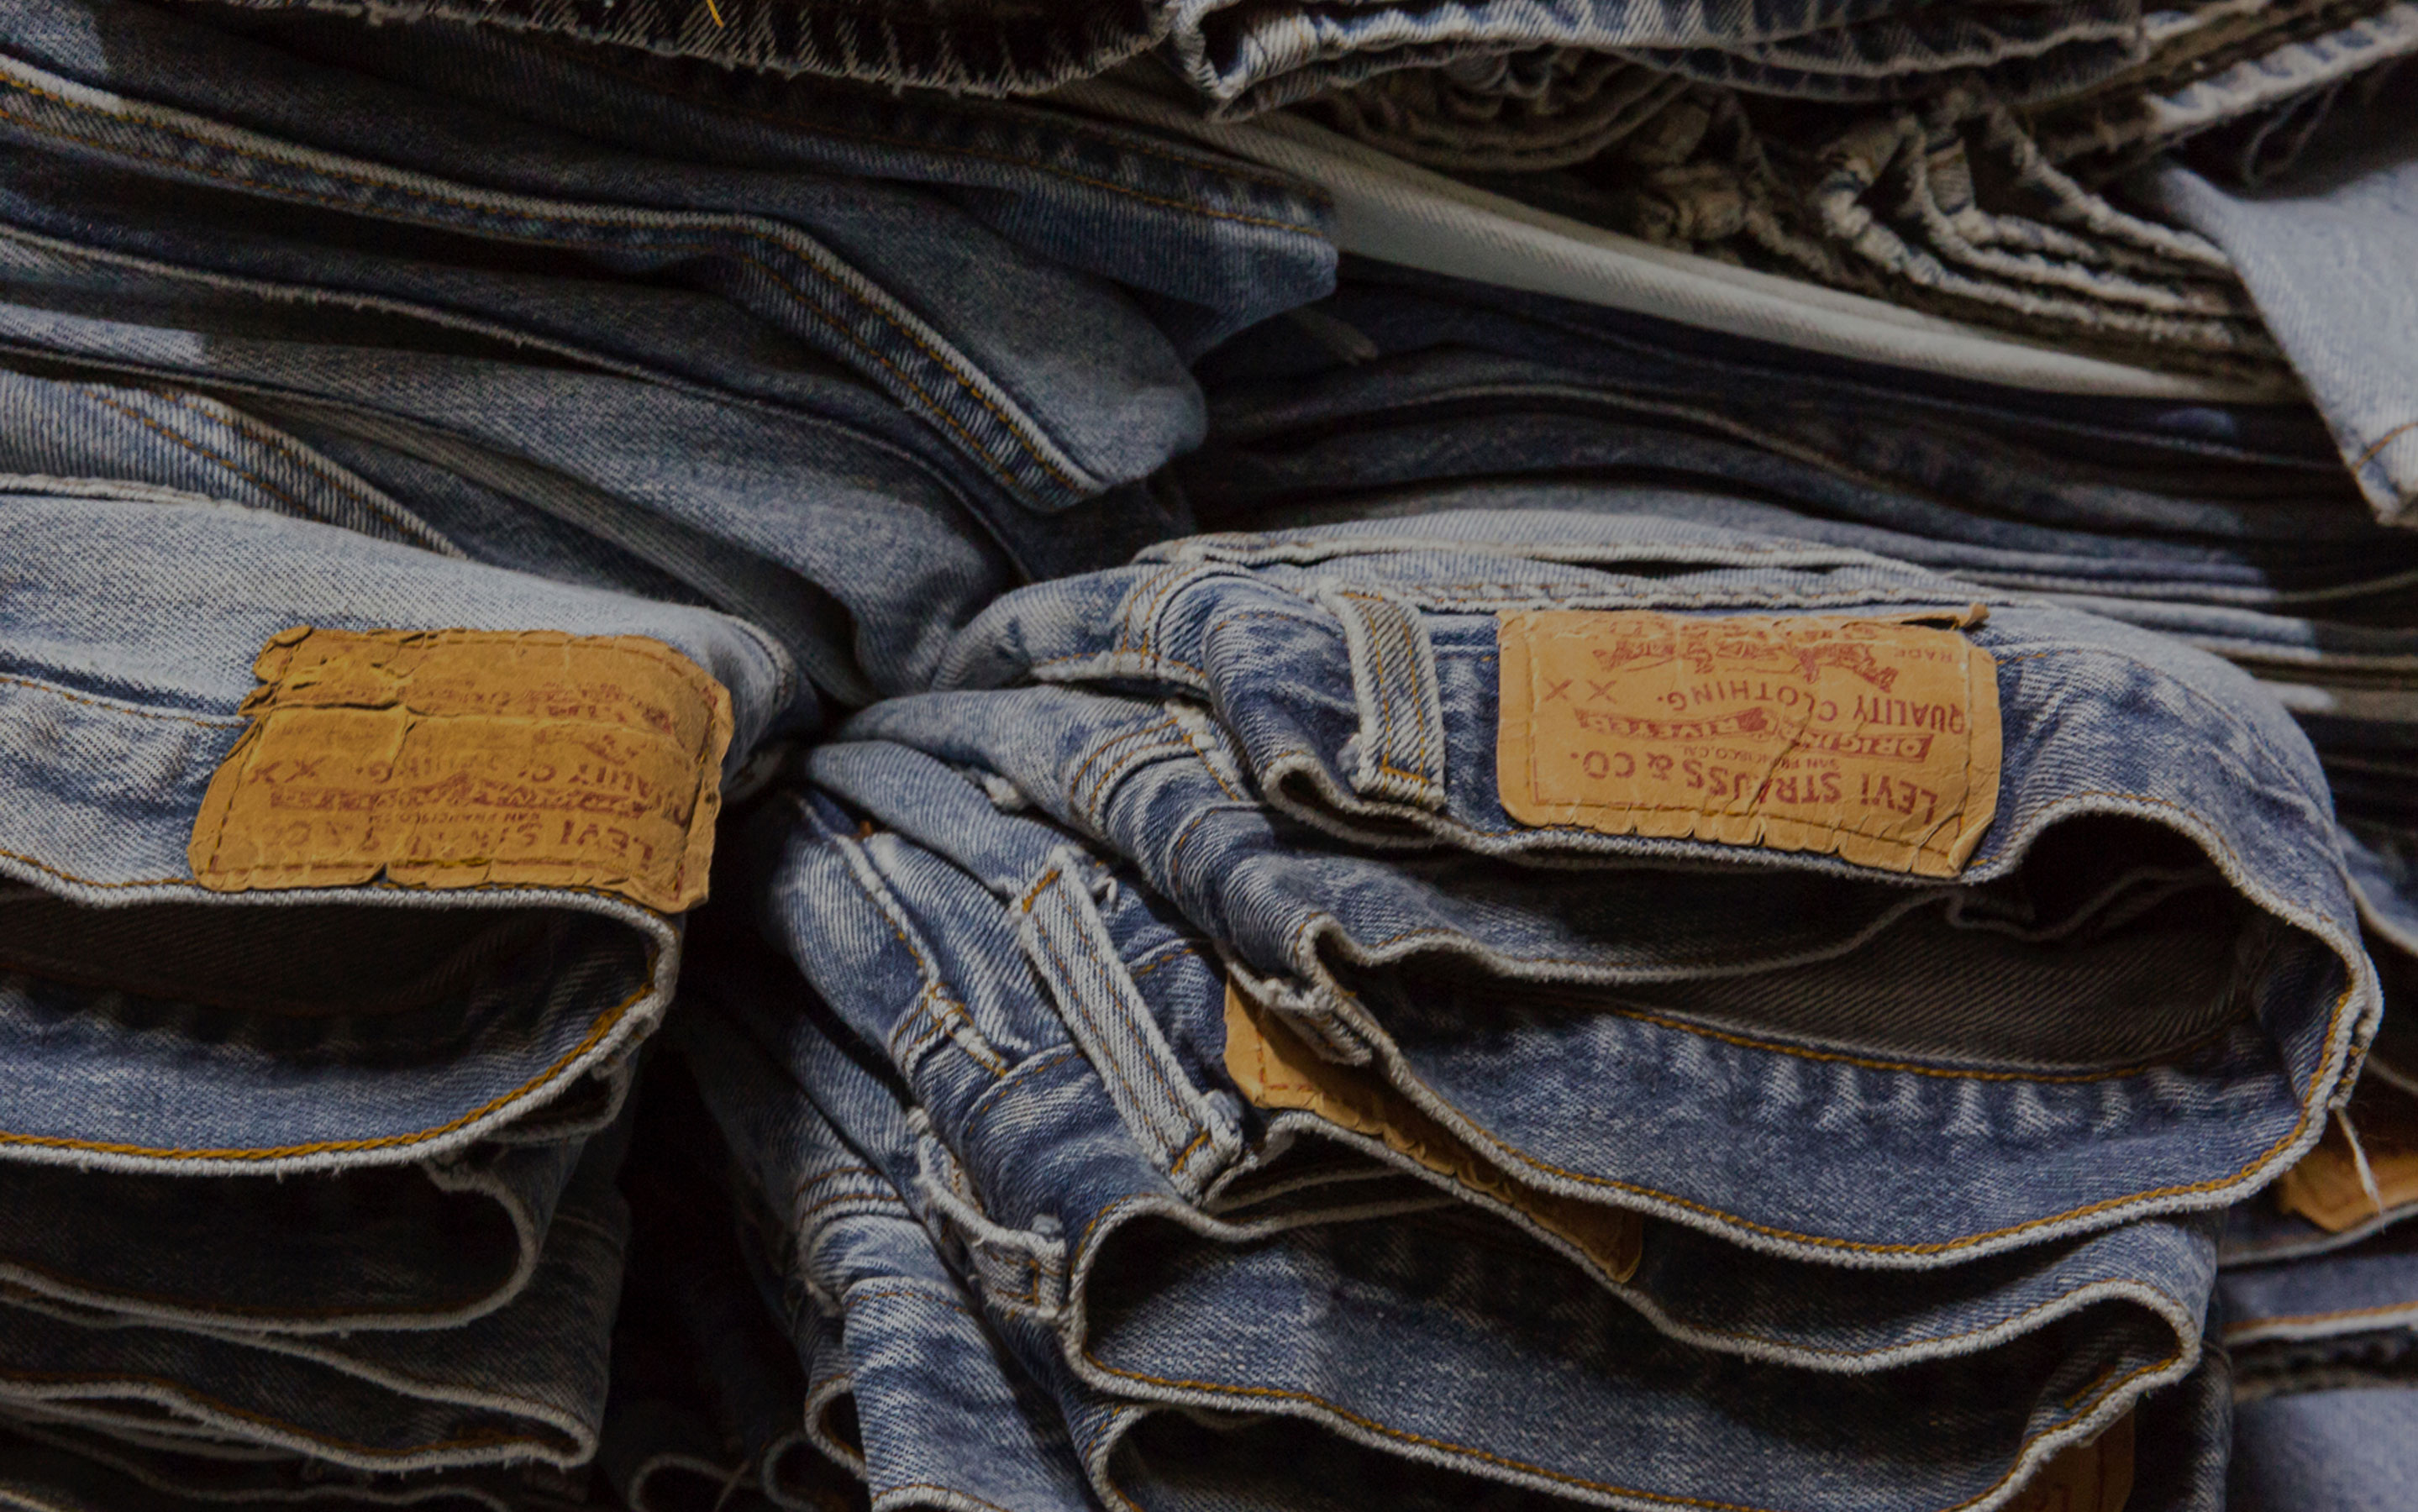 levis recycled jeans